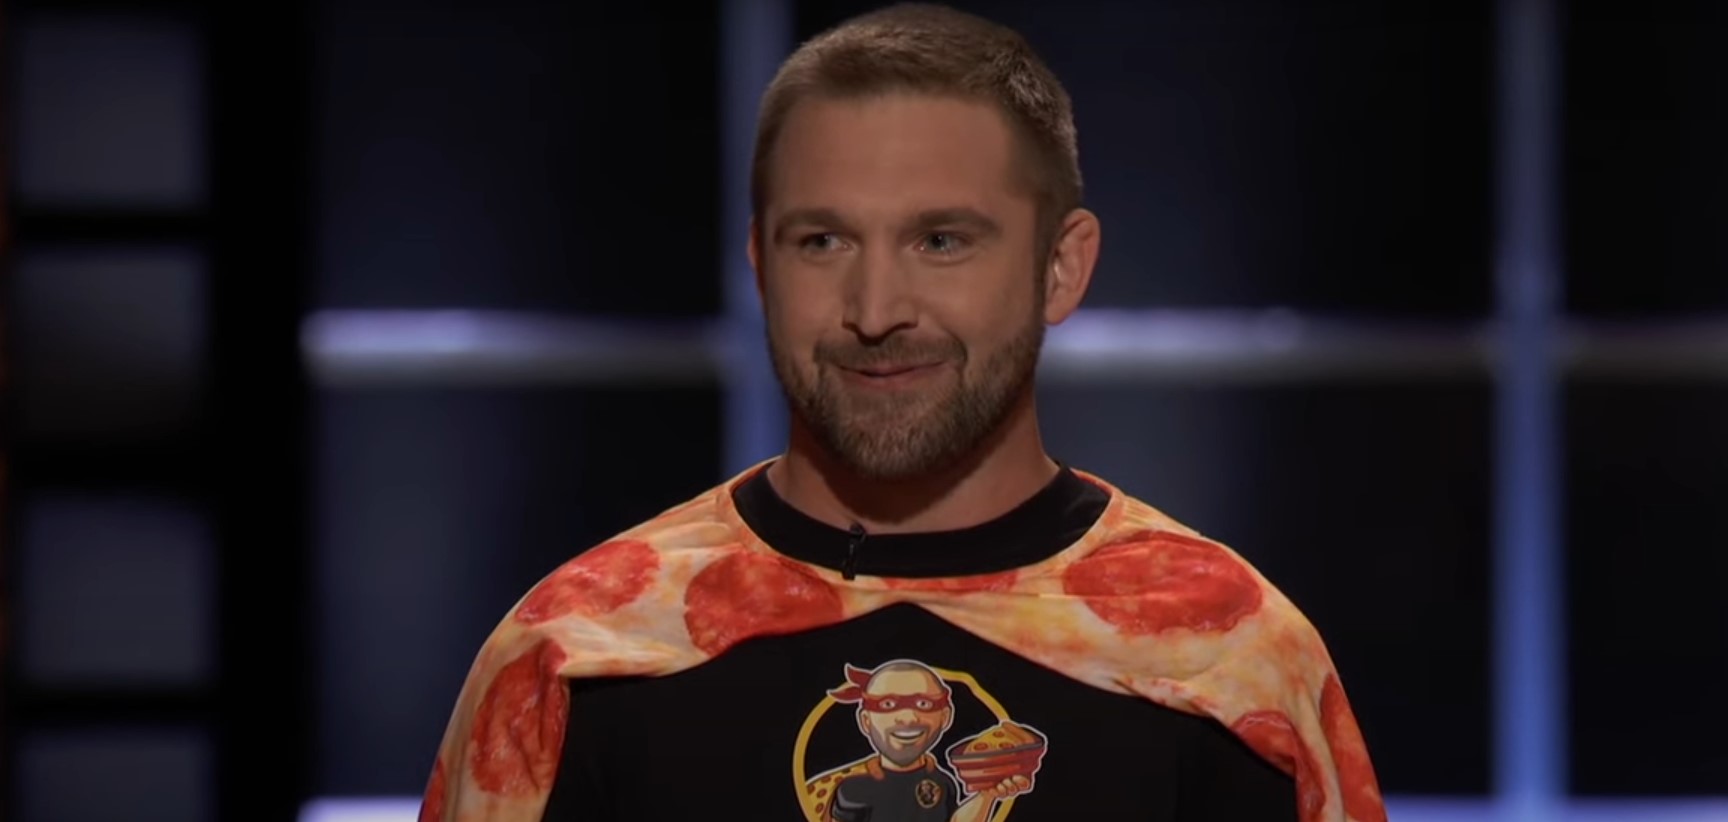 Viral Pizza Pack Container (Seen on Shark Tank) is Collapsible and